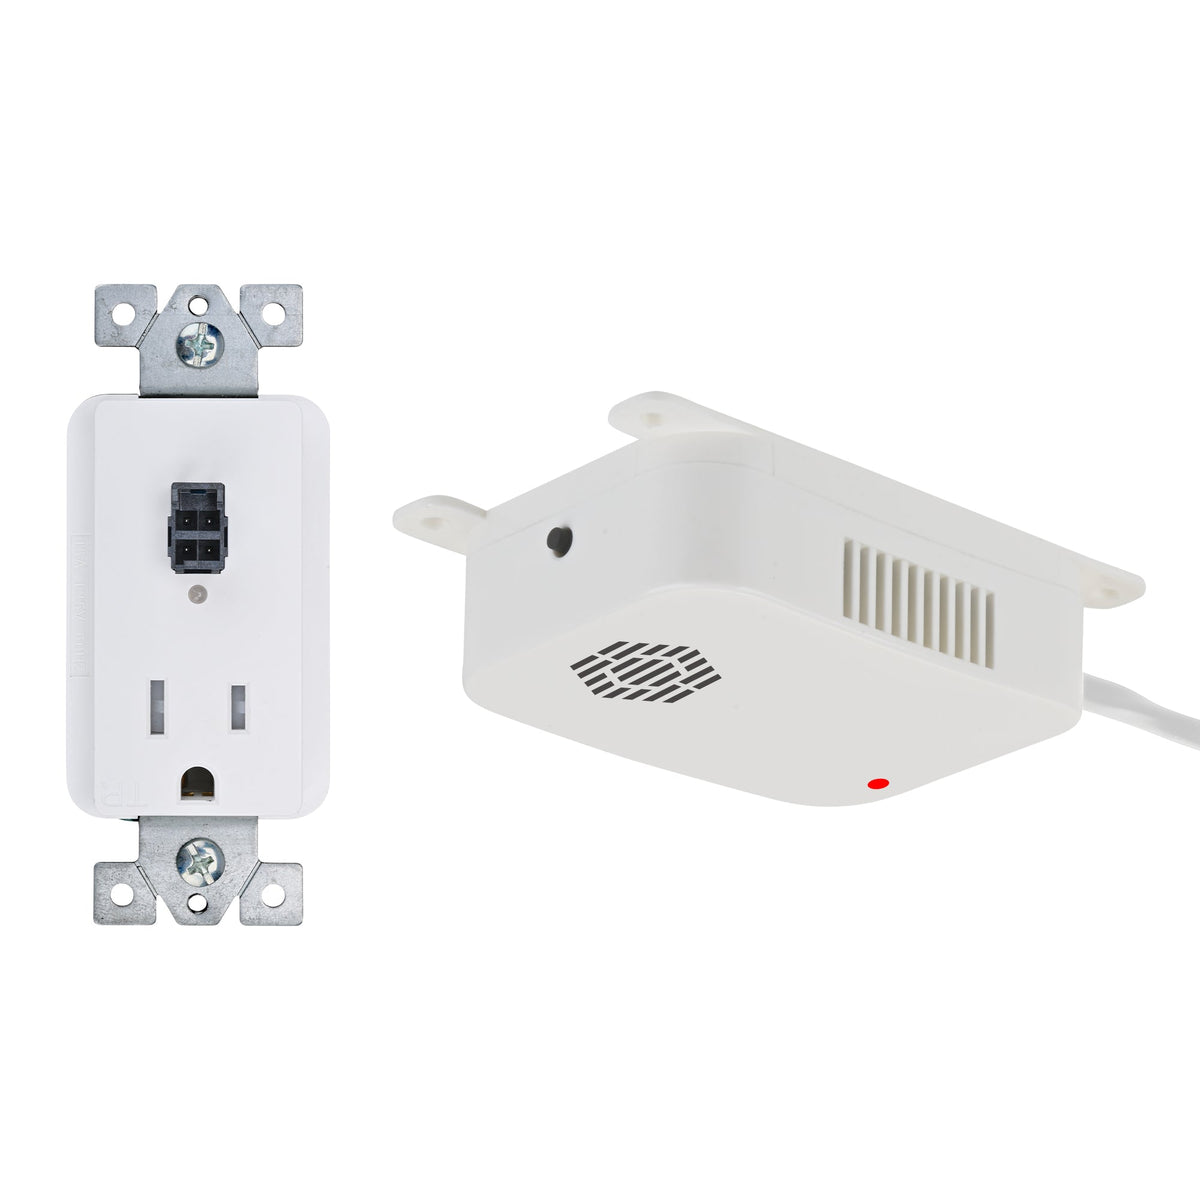 15 amp Safety Interlock Outlet with Smoke and Heat Sensor